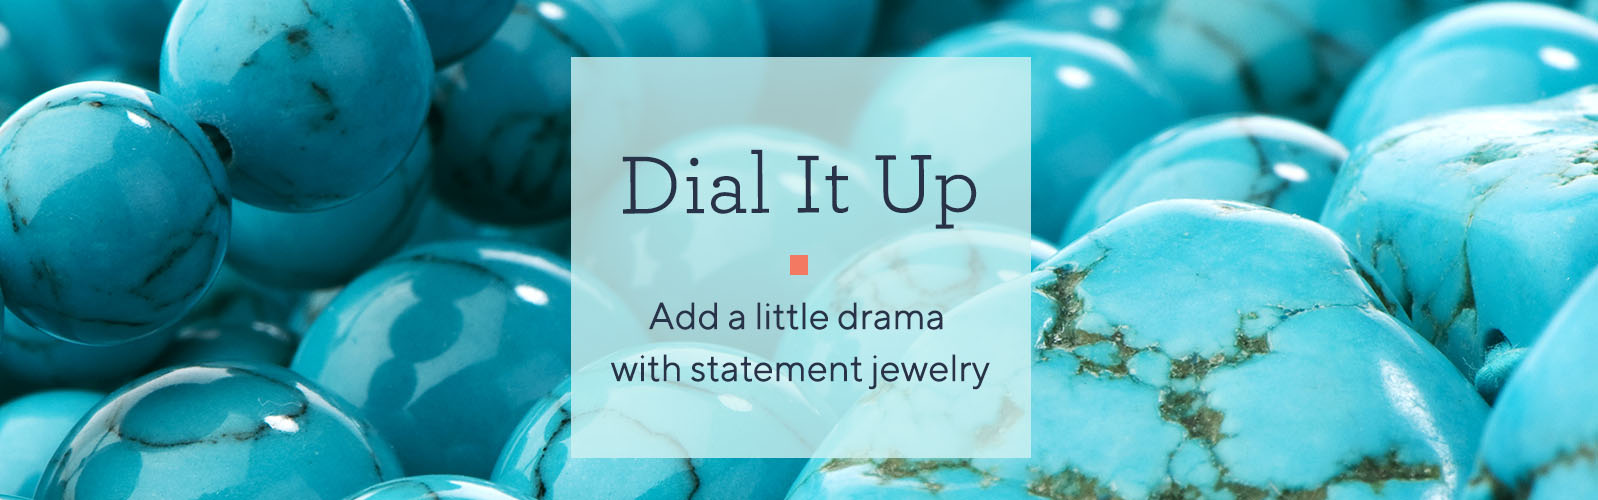 Dial It Up  Add a little drama with statement jewelry